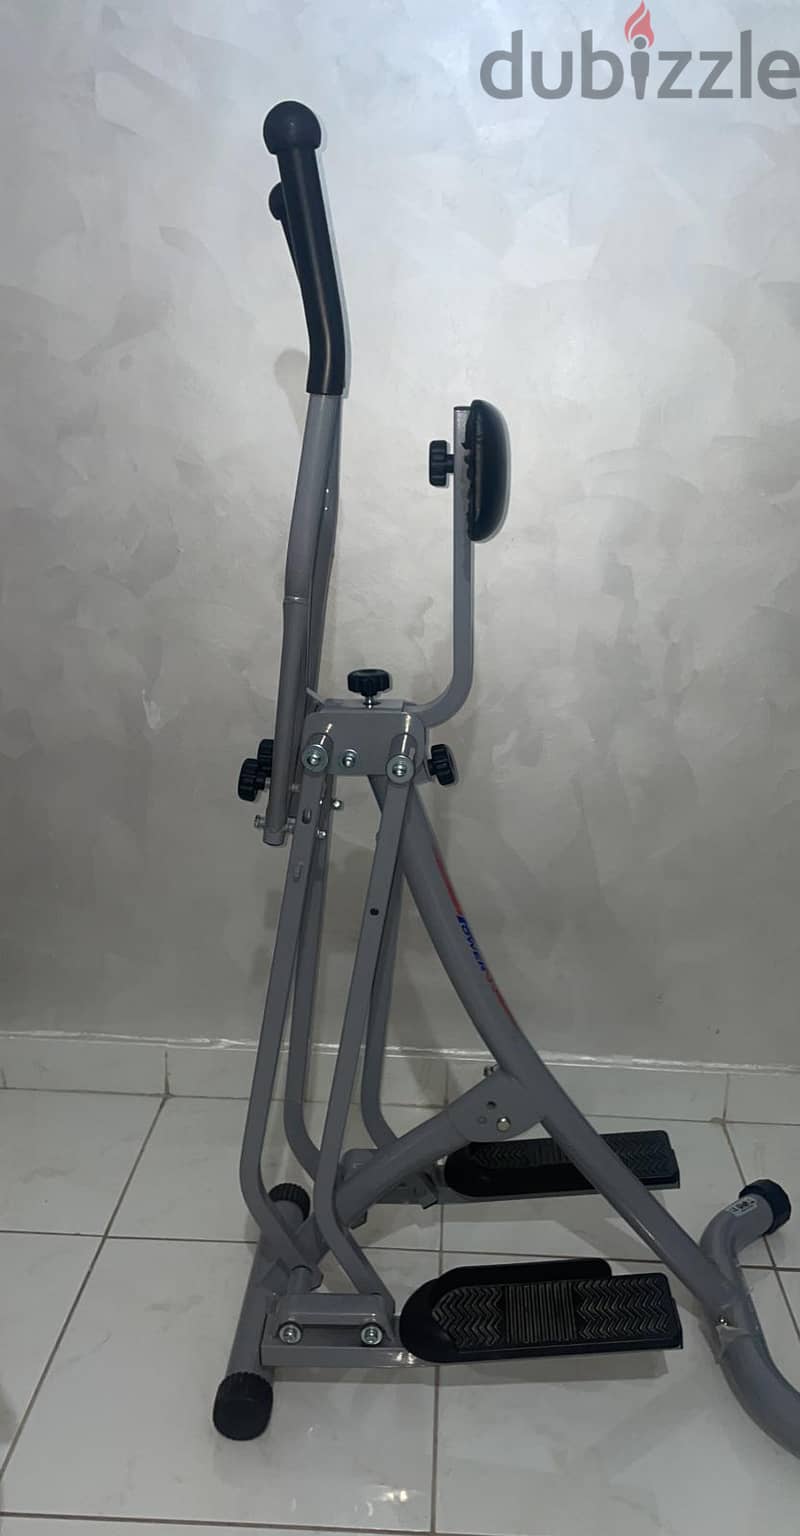 Brand new treadmill and cycling machine for sale in a very discounted 8